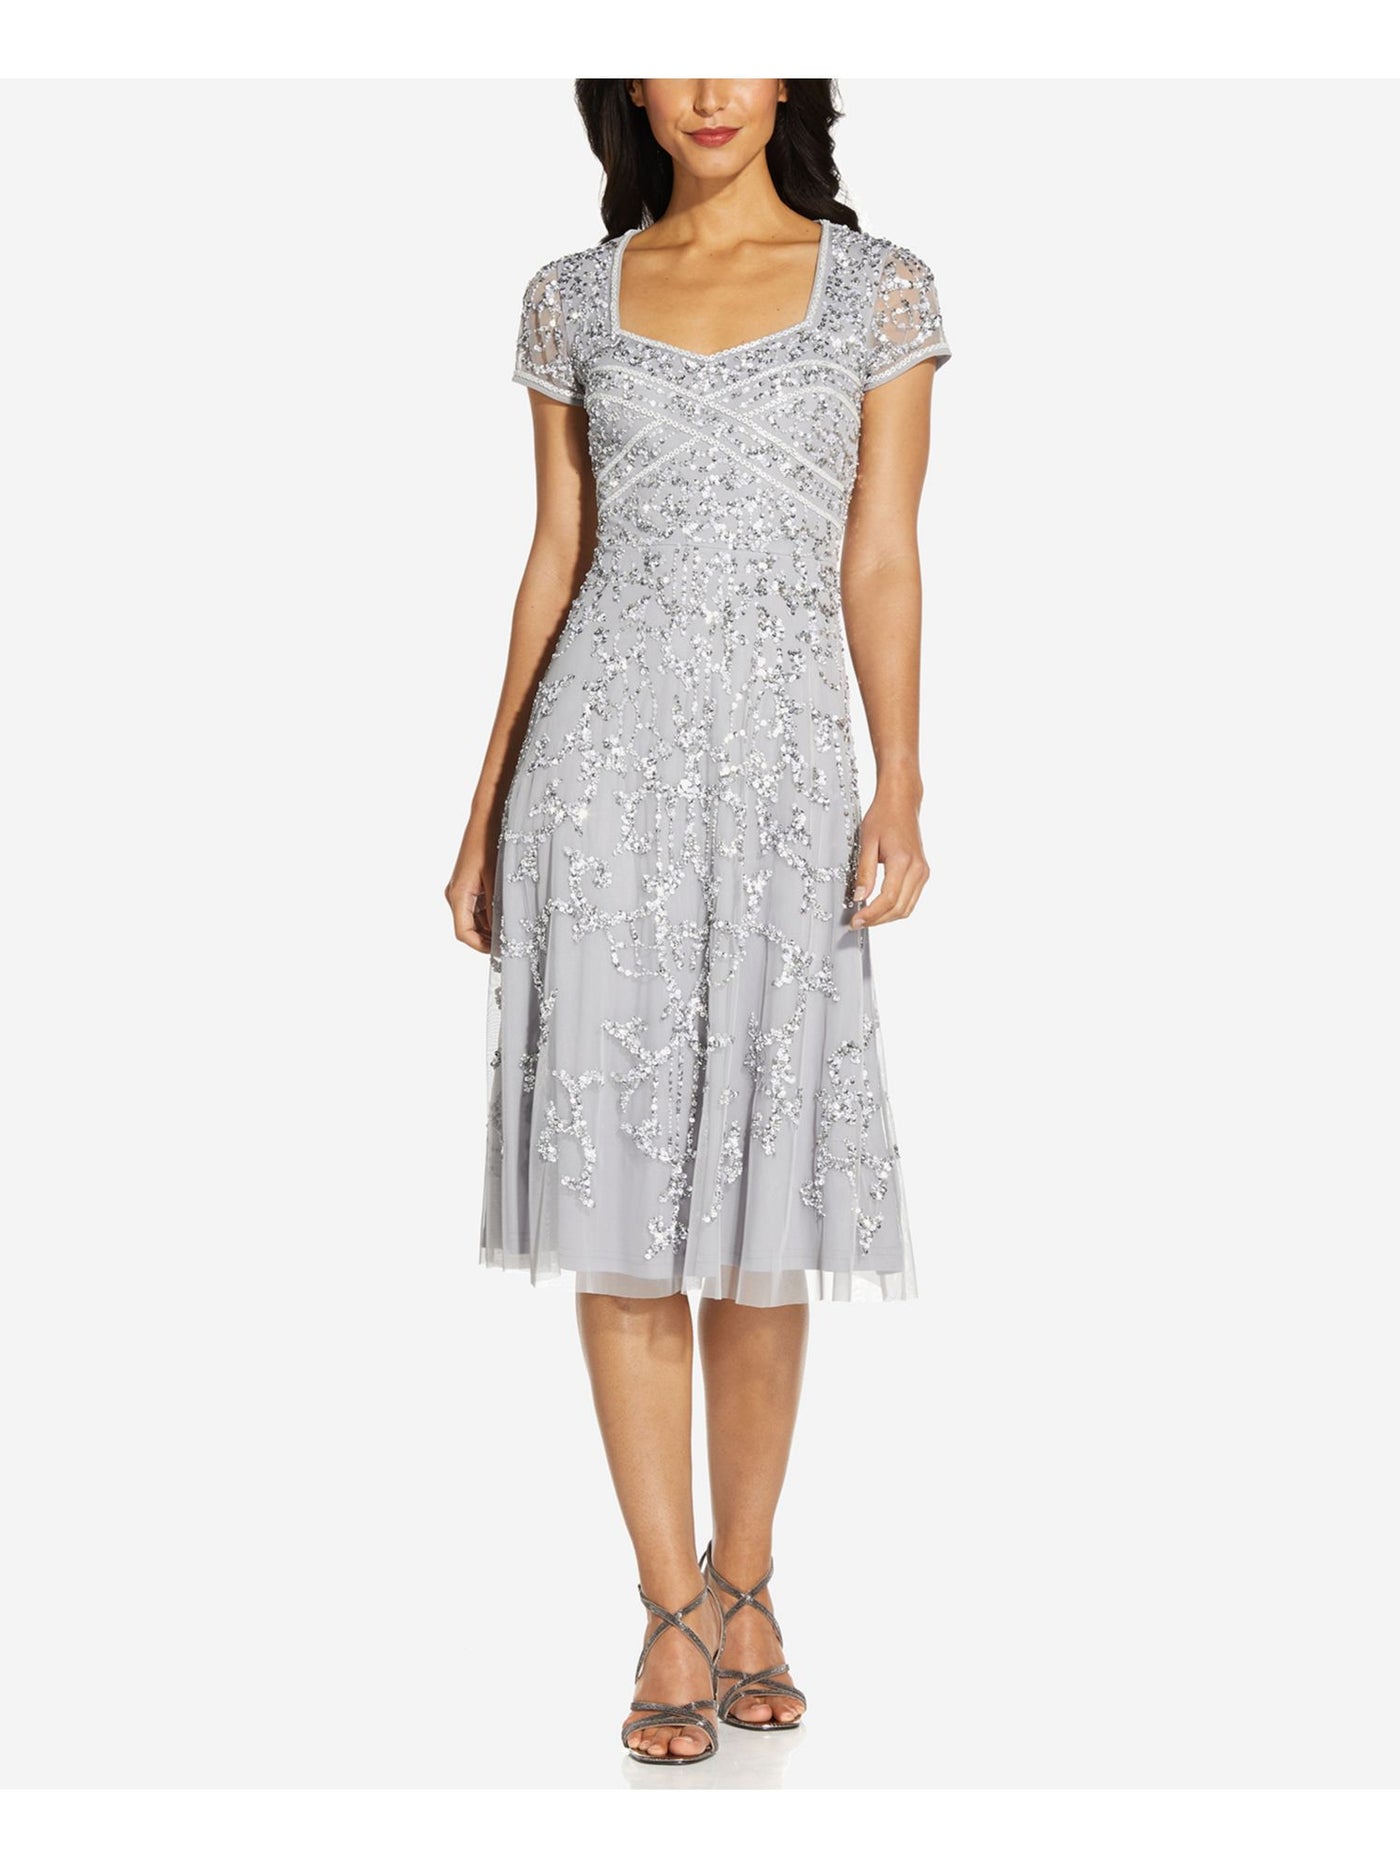 ADRIANNA PAPELL Womens Silver Embellished Zippered Cap Sleeve Queen Anne Neckline Below The Knee Formal Fit + Flare Dress 2